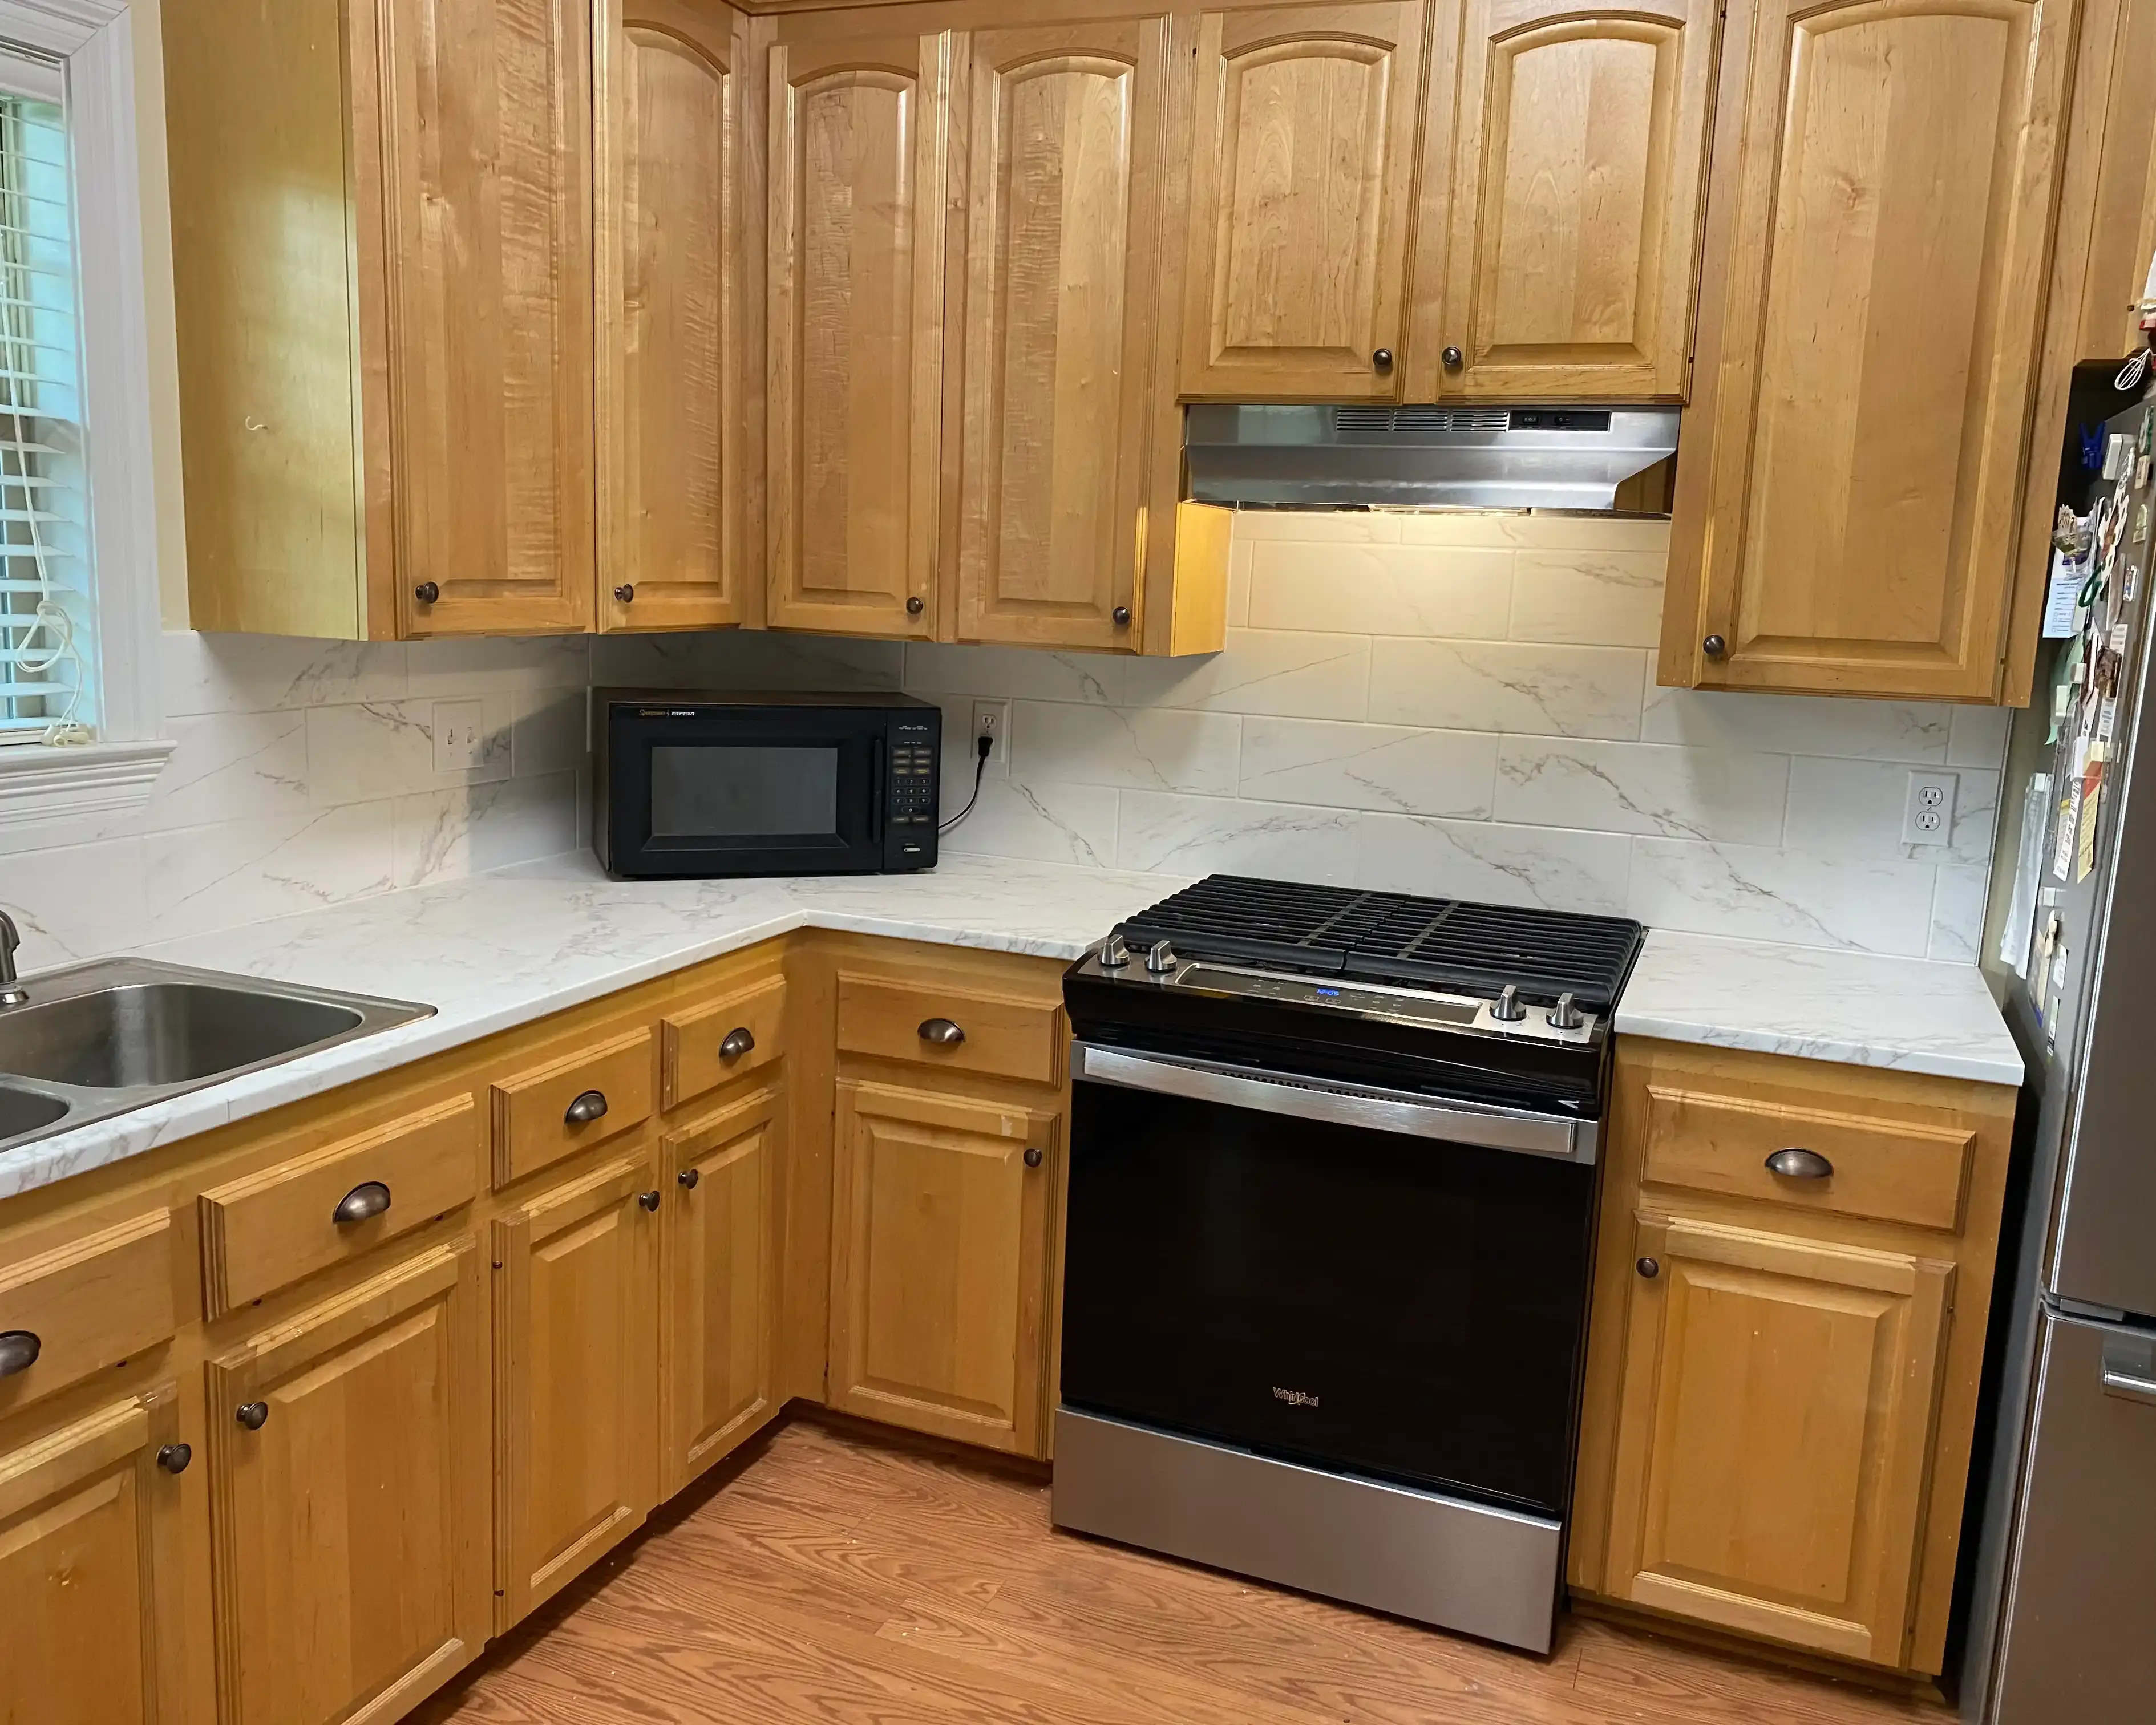 Kitchen Renovation for Primeaux's Handyman Services in Youngsville, Louisiana